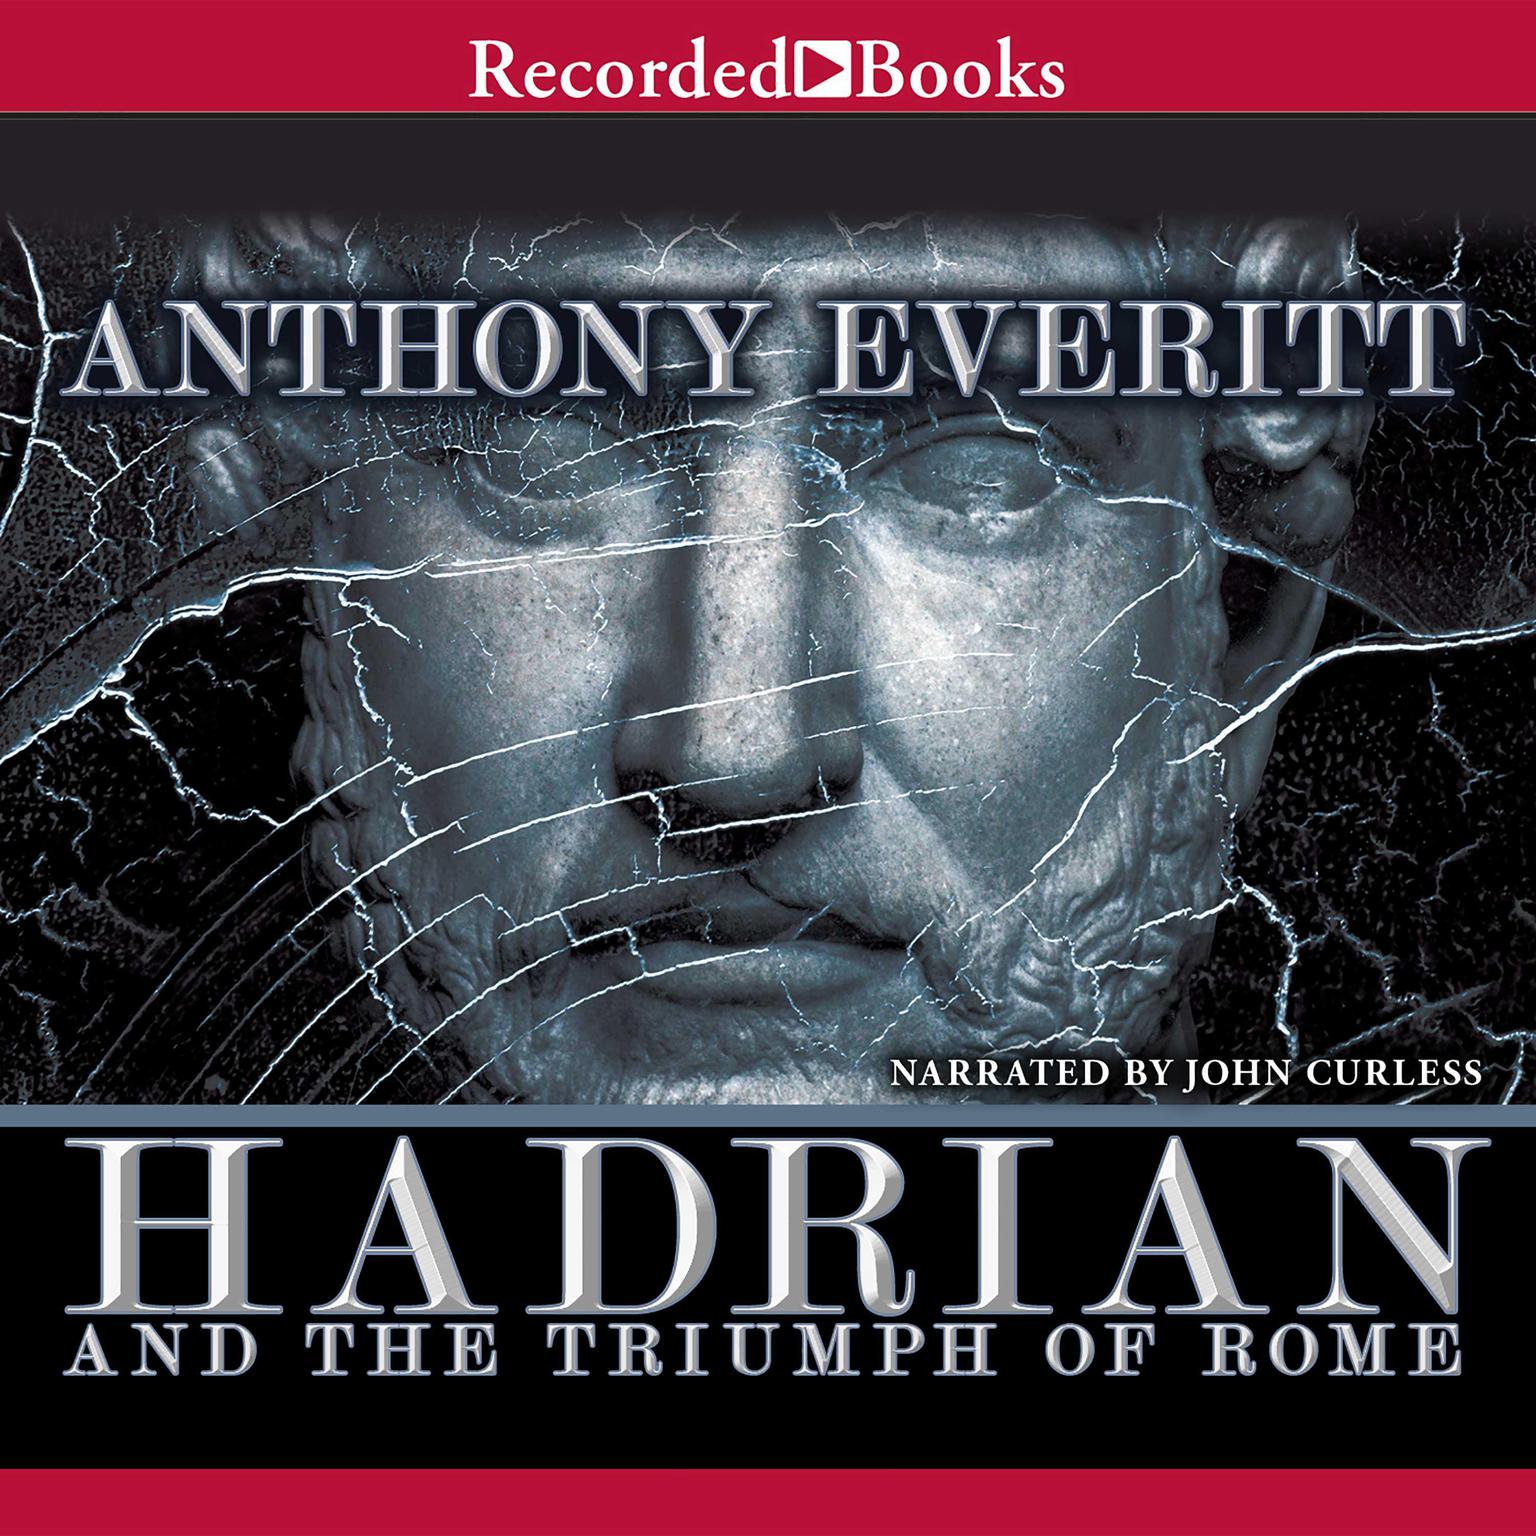 Hadrian and the Triumph of Rome Audiobook, by Anthony Everitt